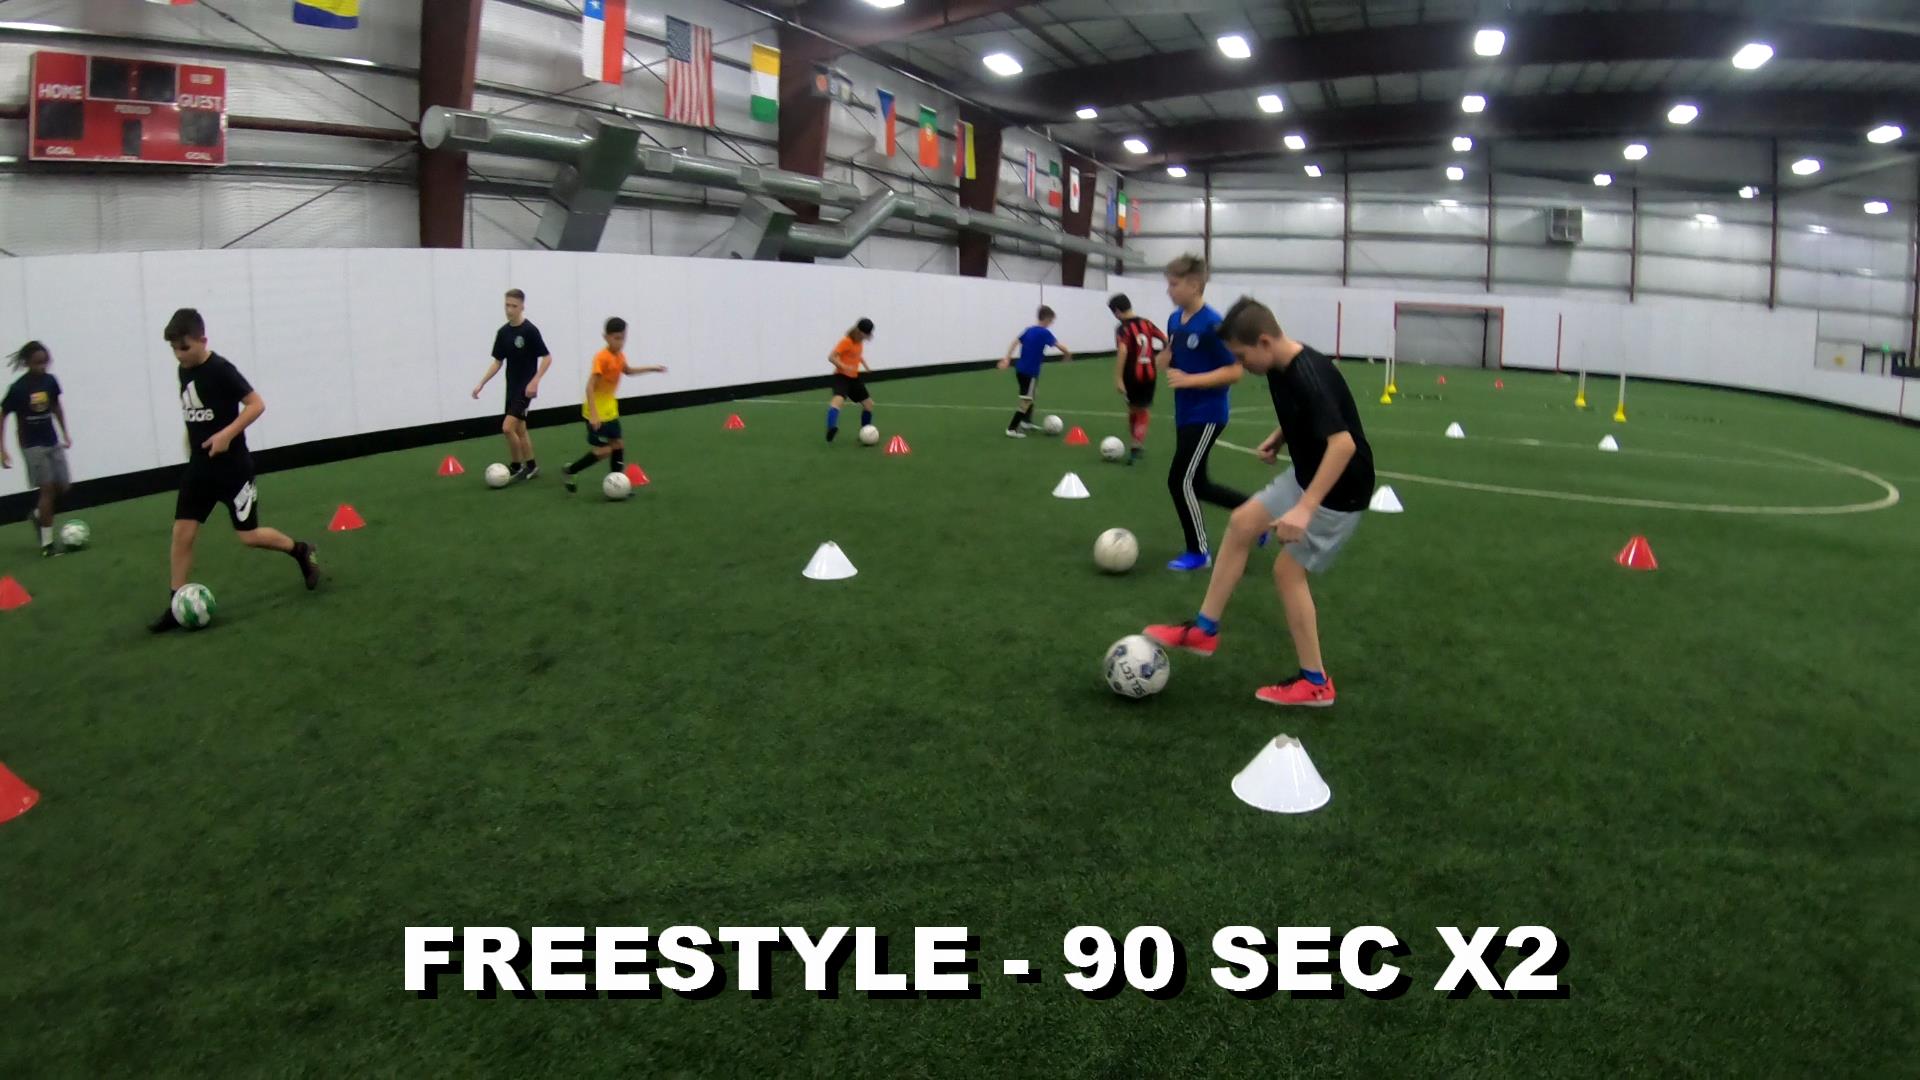 SOCCER COACHING DRILLS FOR KIDS 1